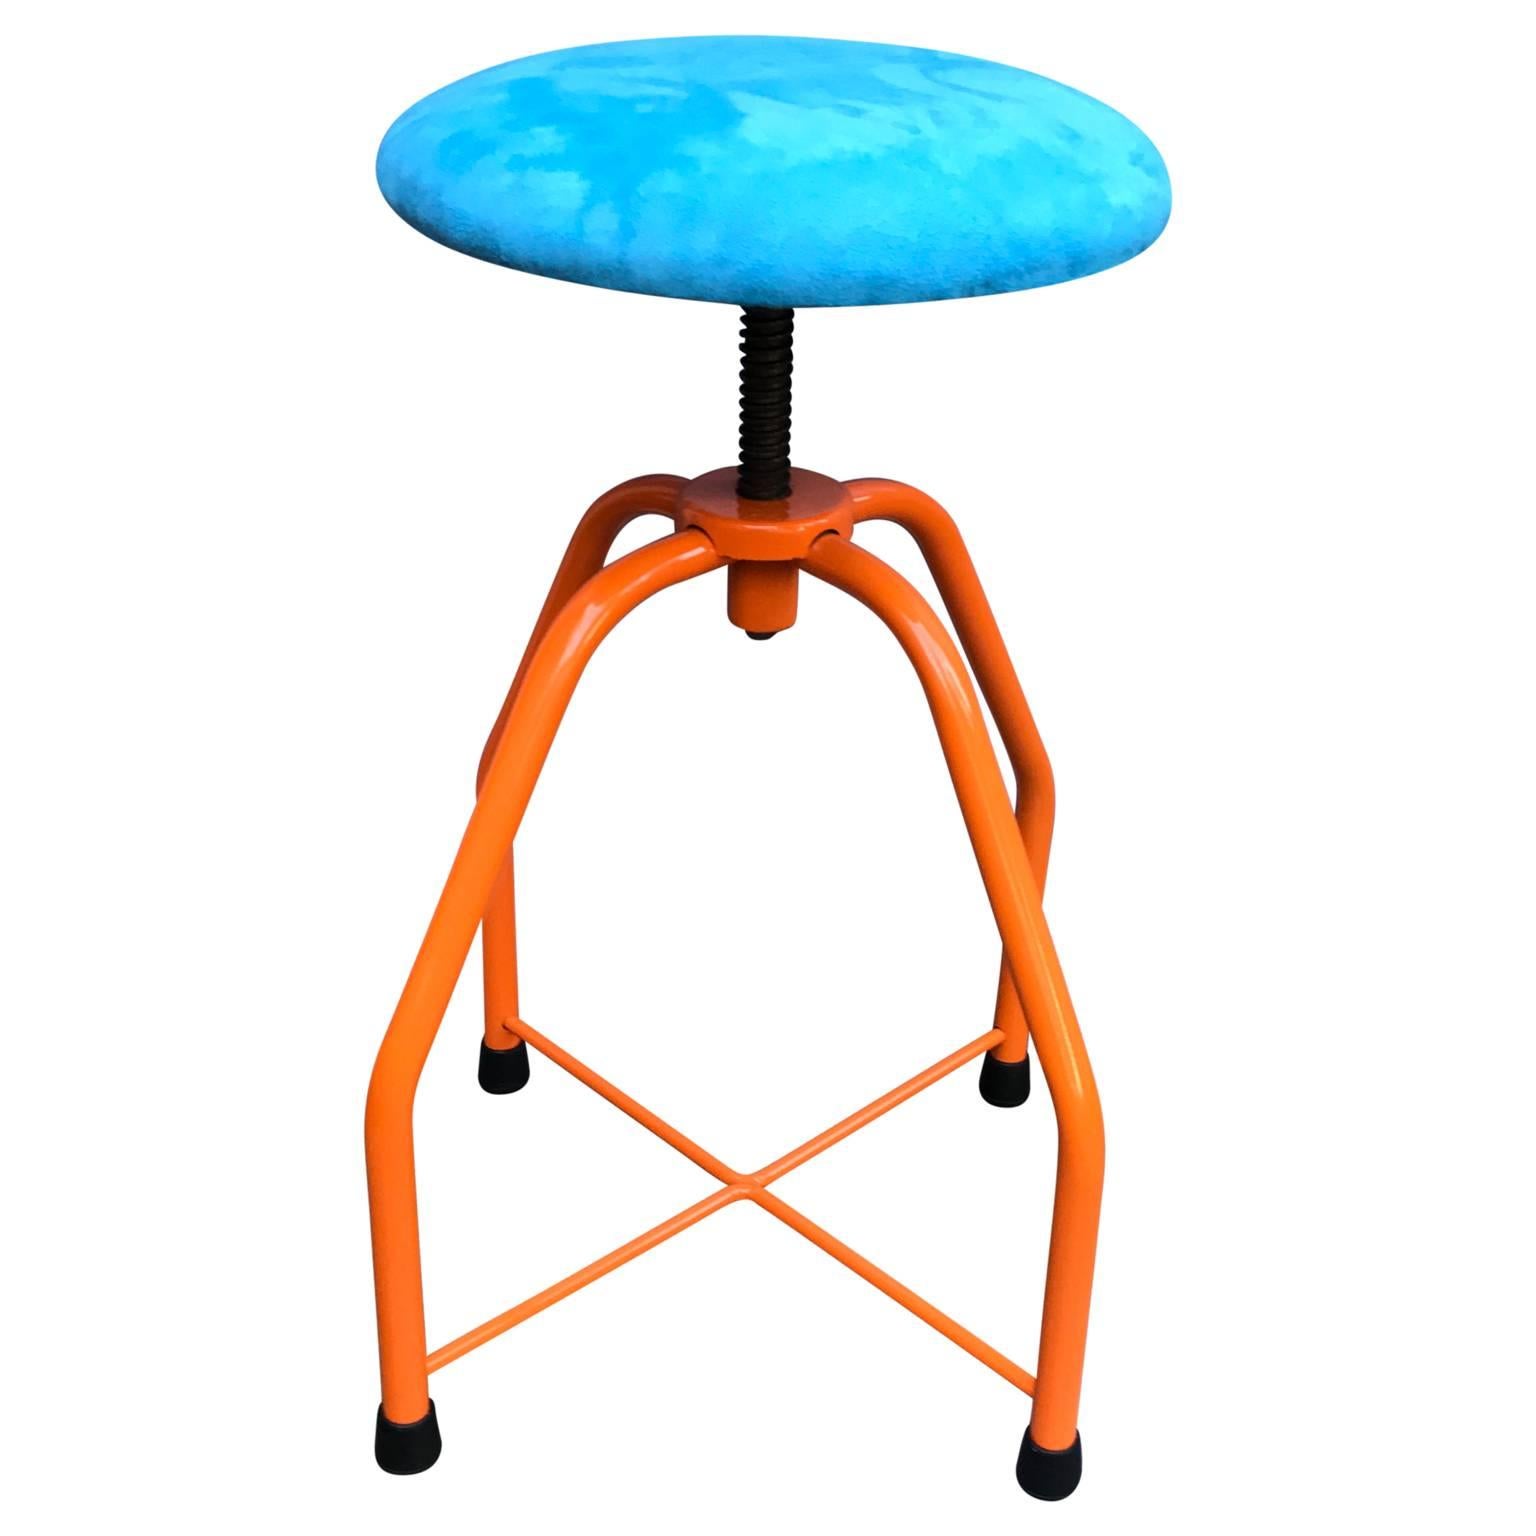 Bright orange Industrial era stool with blue faux suede fabric seat. This fun and bright stool has a seat that adjusts for height. Bold and mighty, this fun piece will be a great accent in a kitchen, mudroom or anywhere you want an eclectic stool.